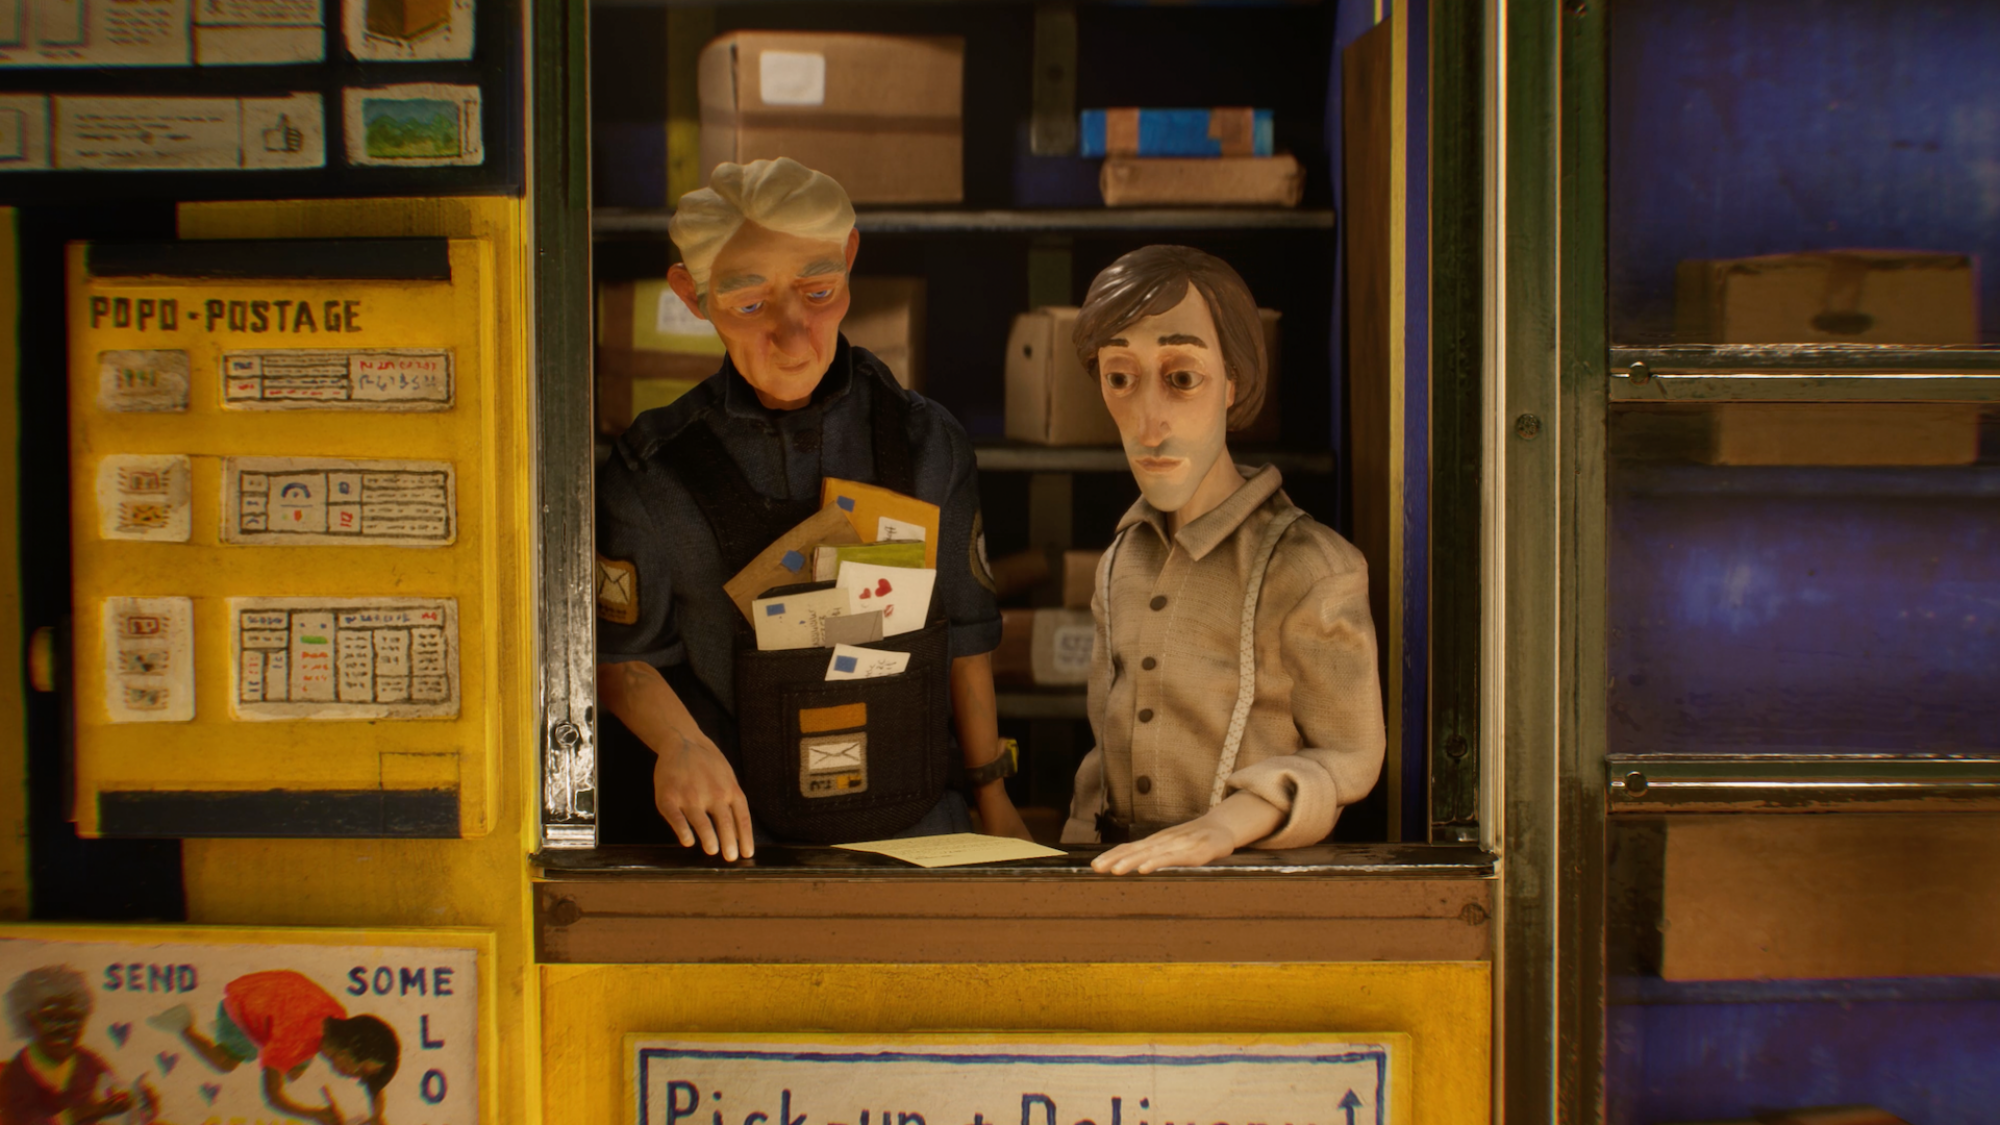 A cozy scene inside a postal office with two characters interacting, surrounded by letters and packages, with a vibrant blue and yellow color scheme.